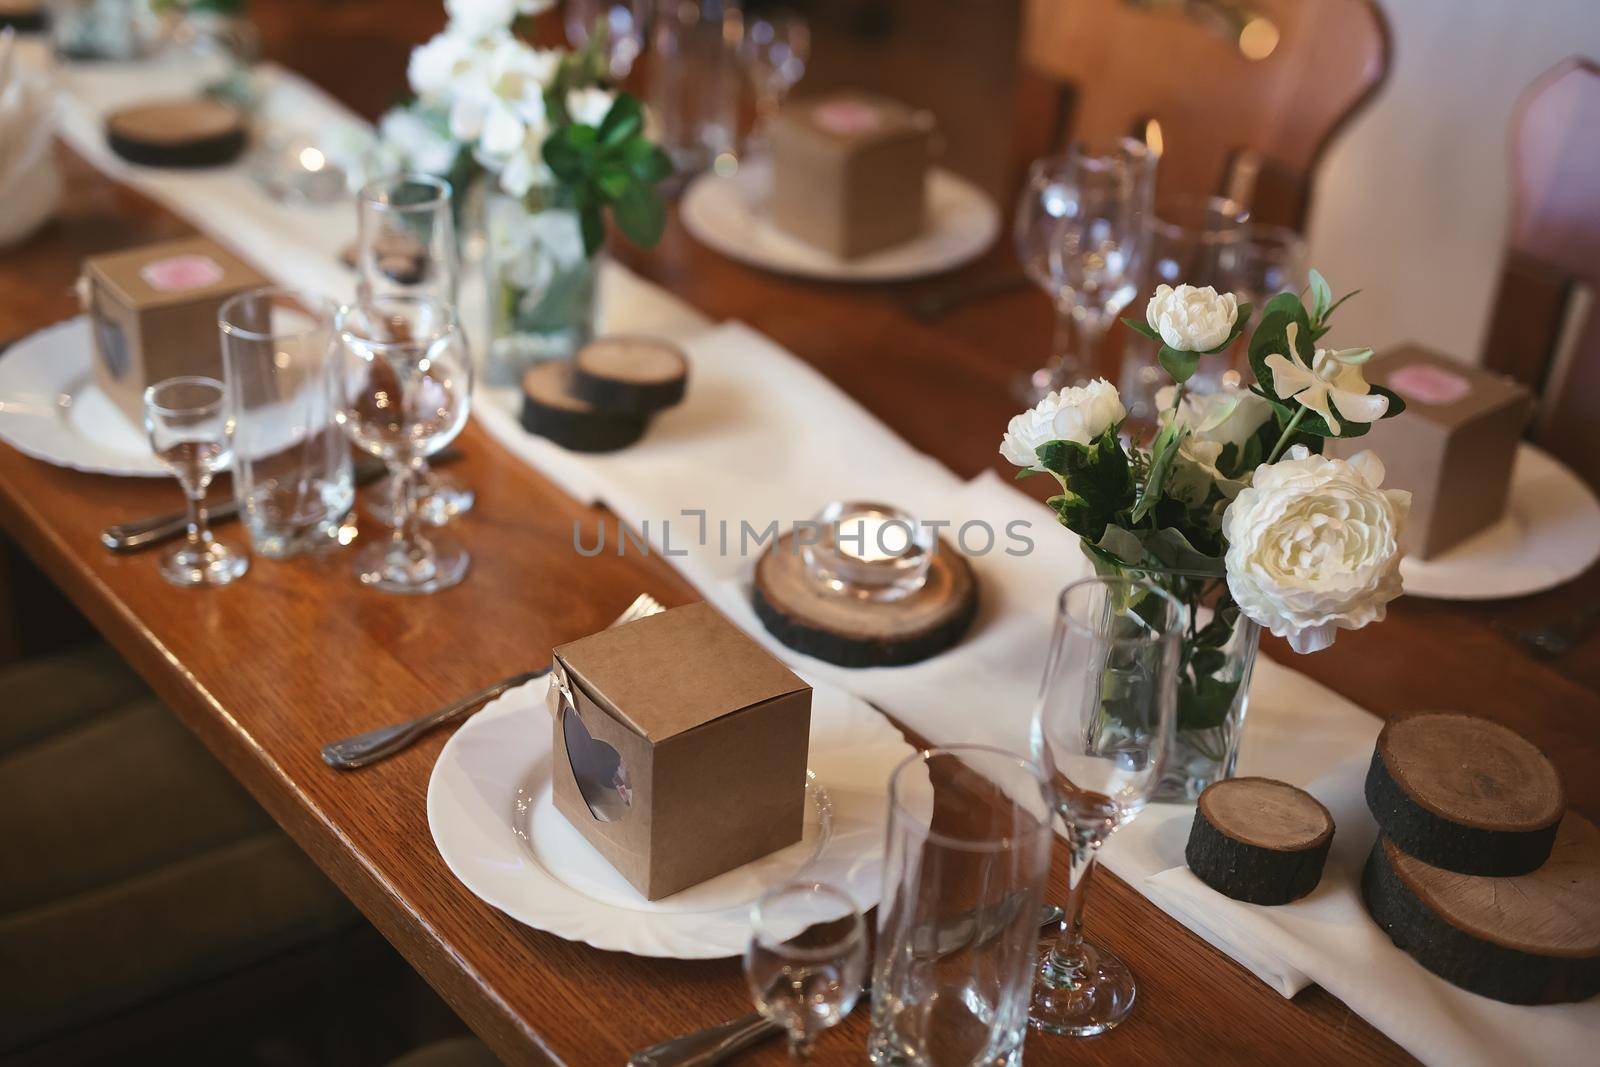 Elegant wedding banquet decoration and table setting in the restaurant by StudioPeace